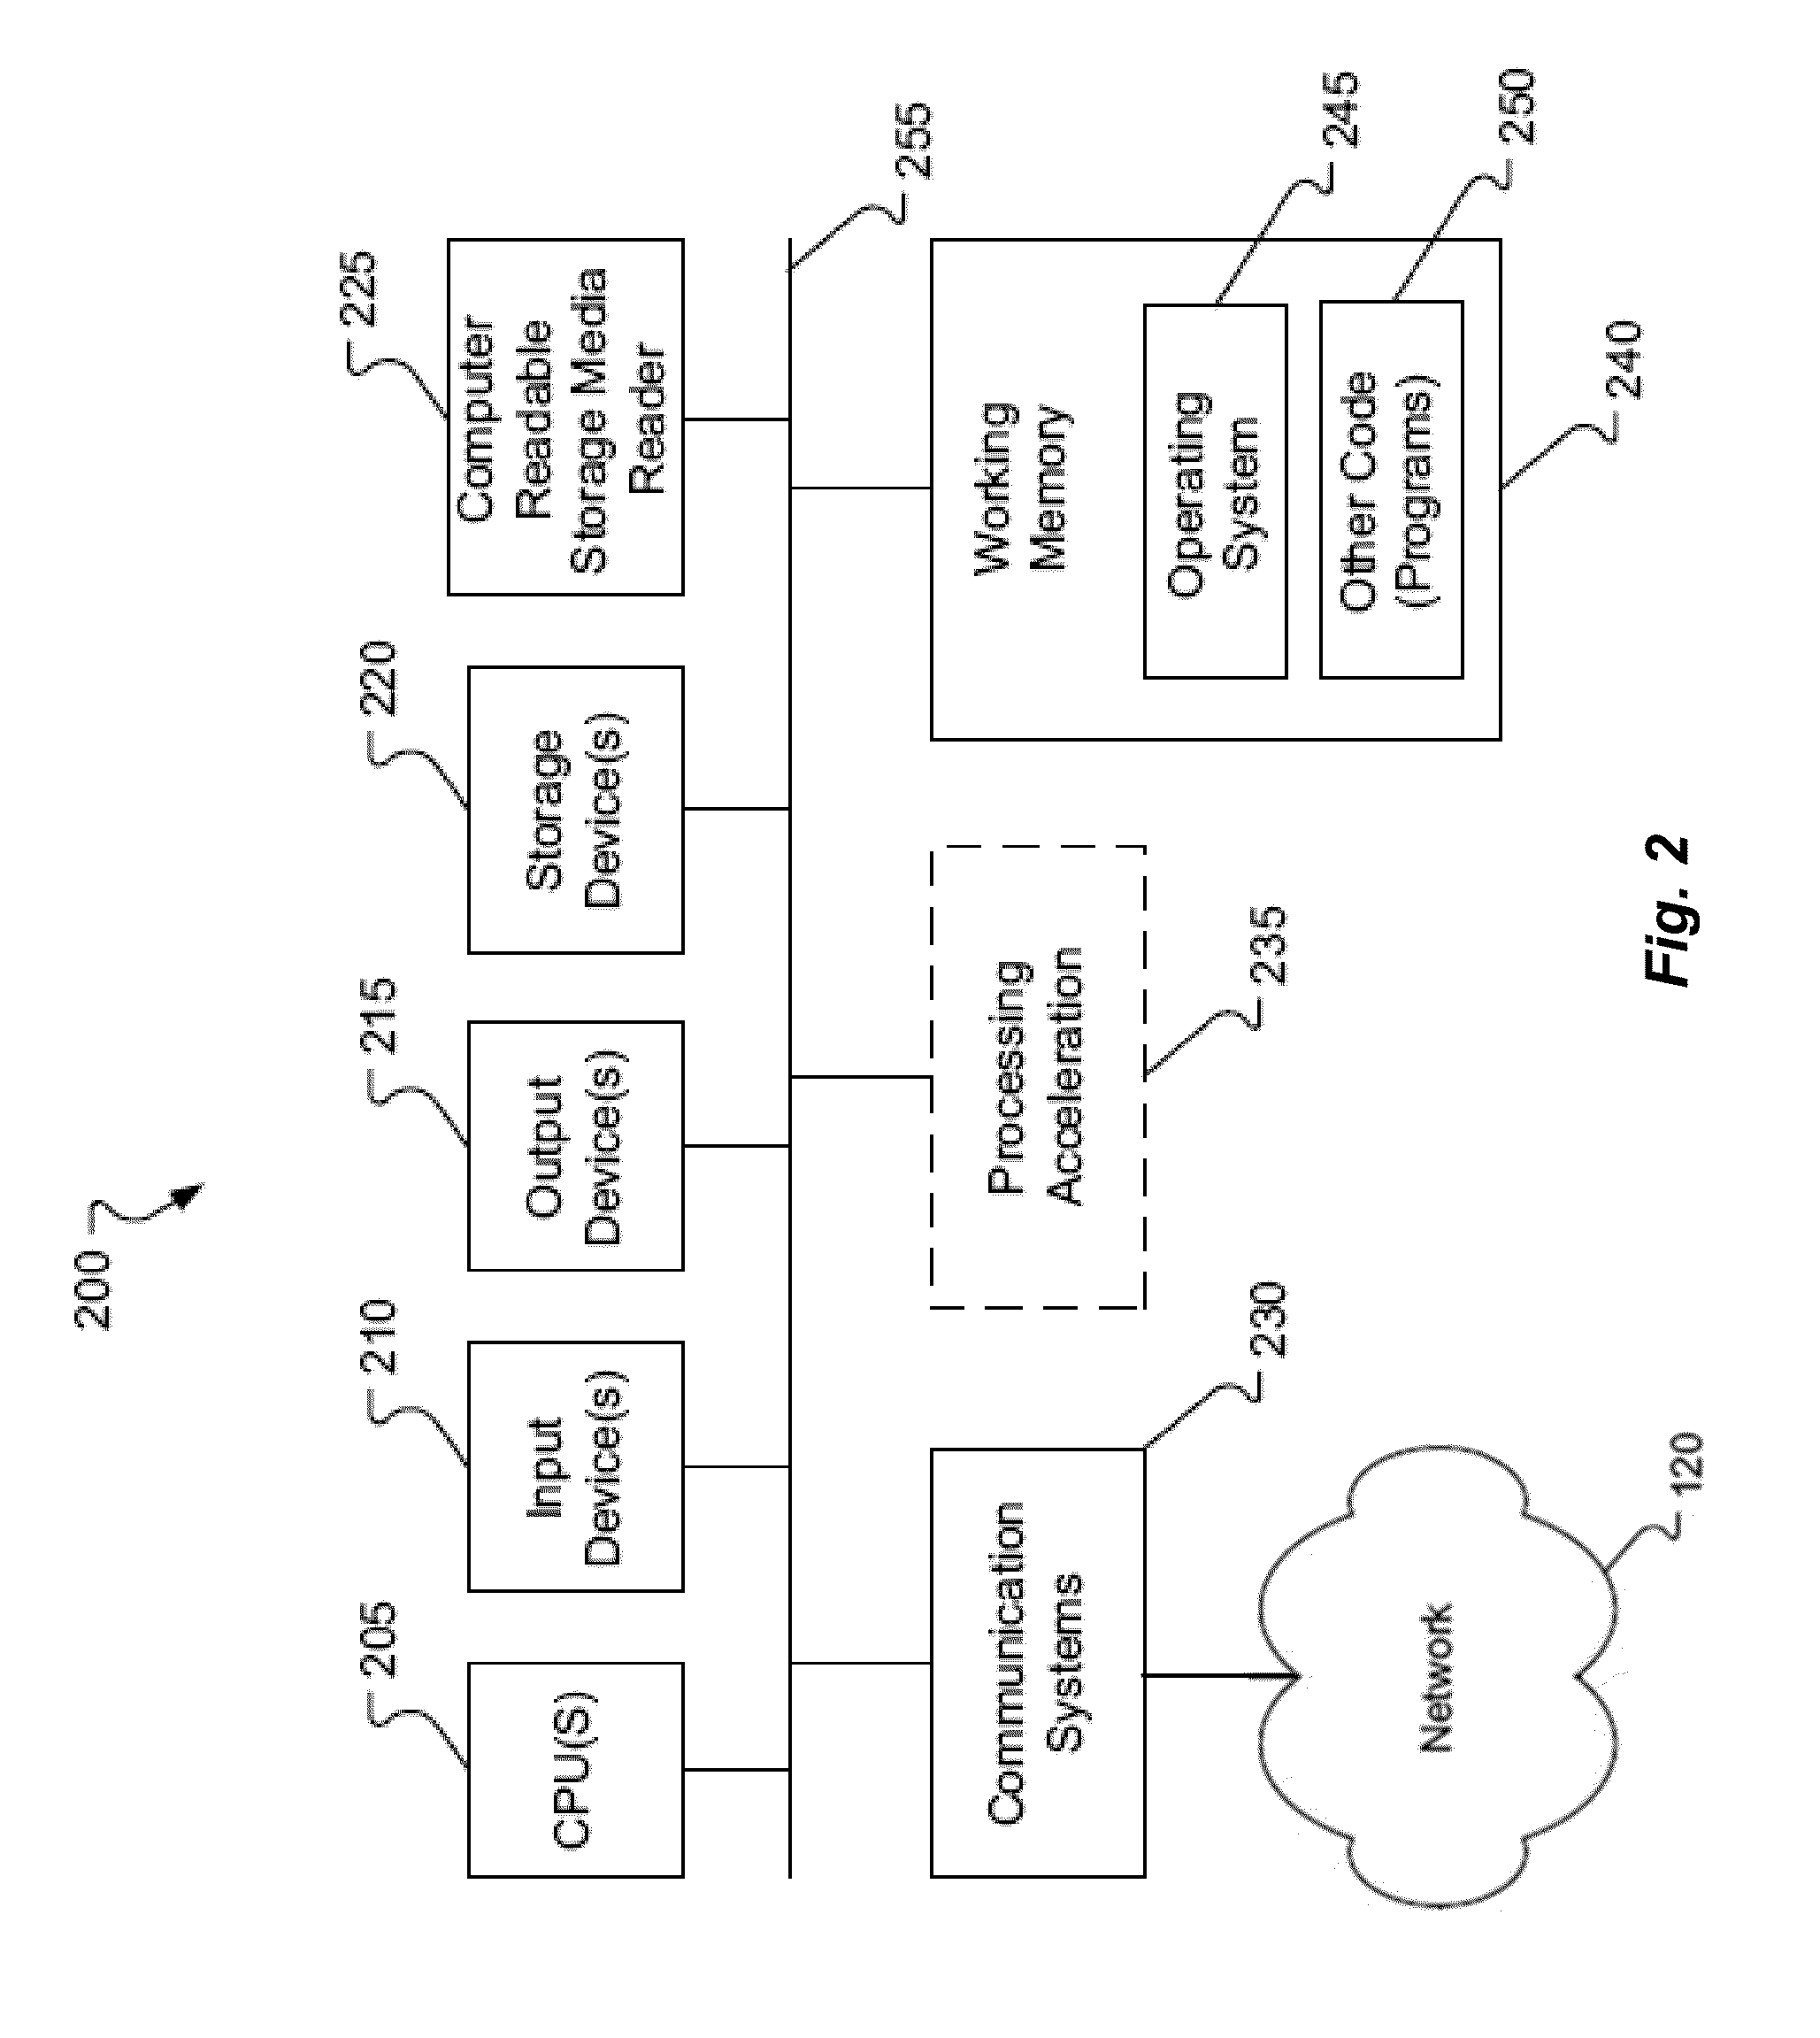 System and method for performance analysis and classification of losses for solar power systems